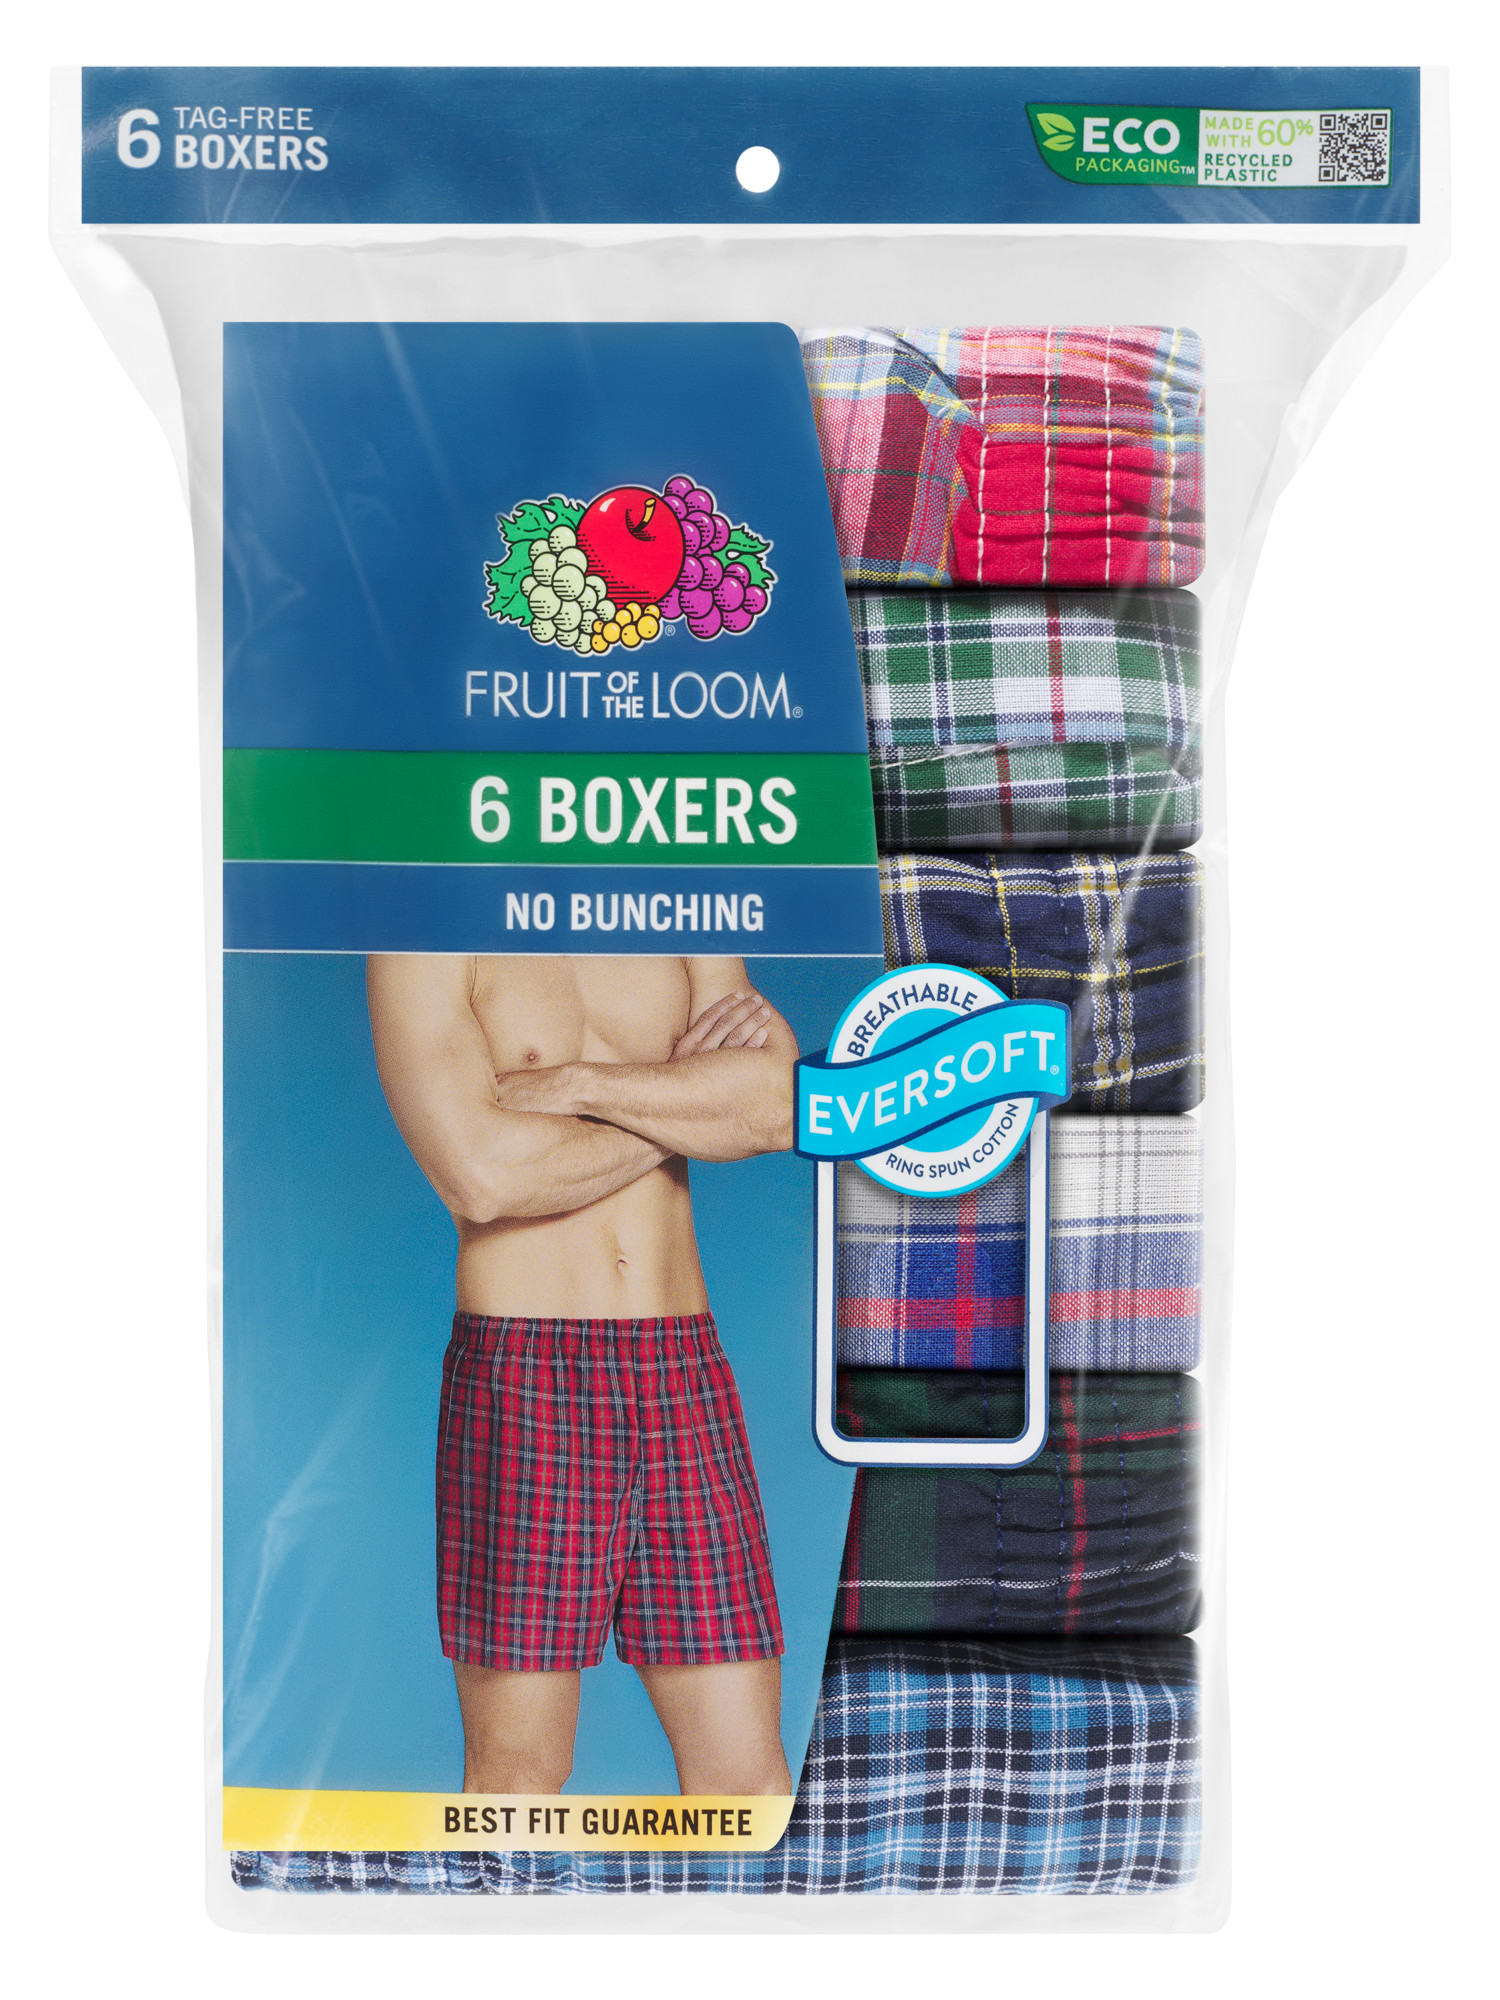 Fruit of the Loom Men's Woven Boxers, 6 Pack - image 3 of 12